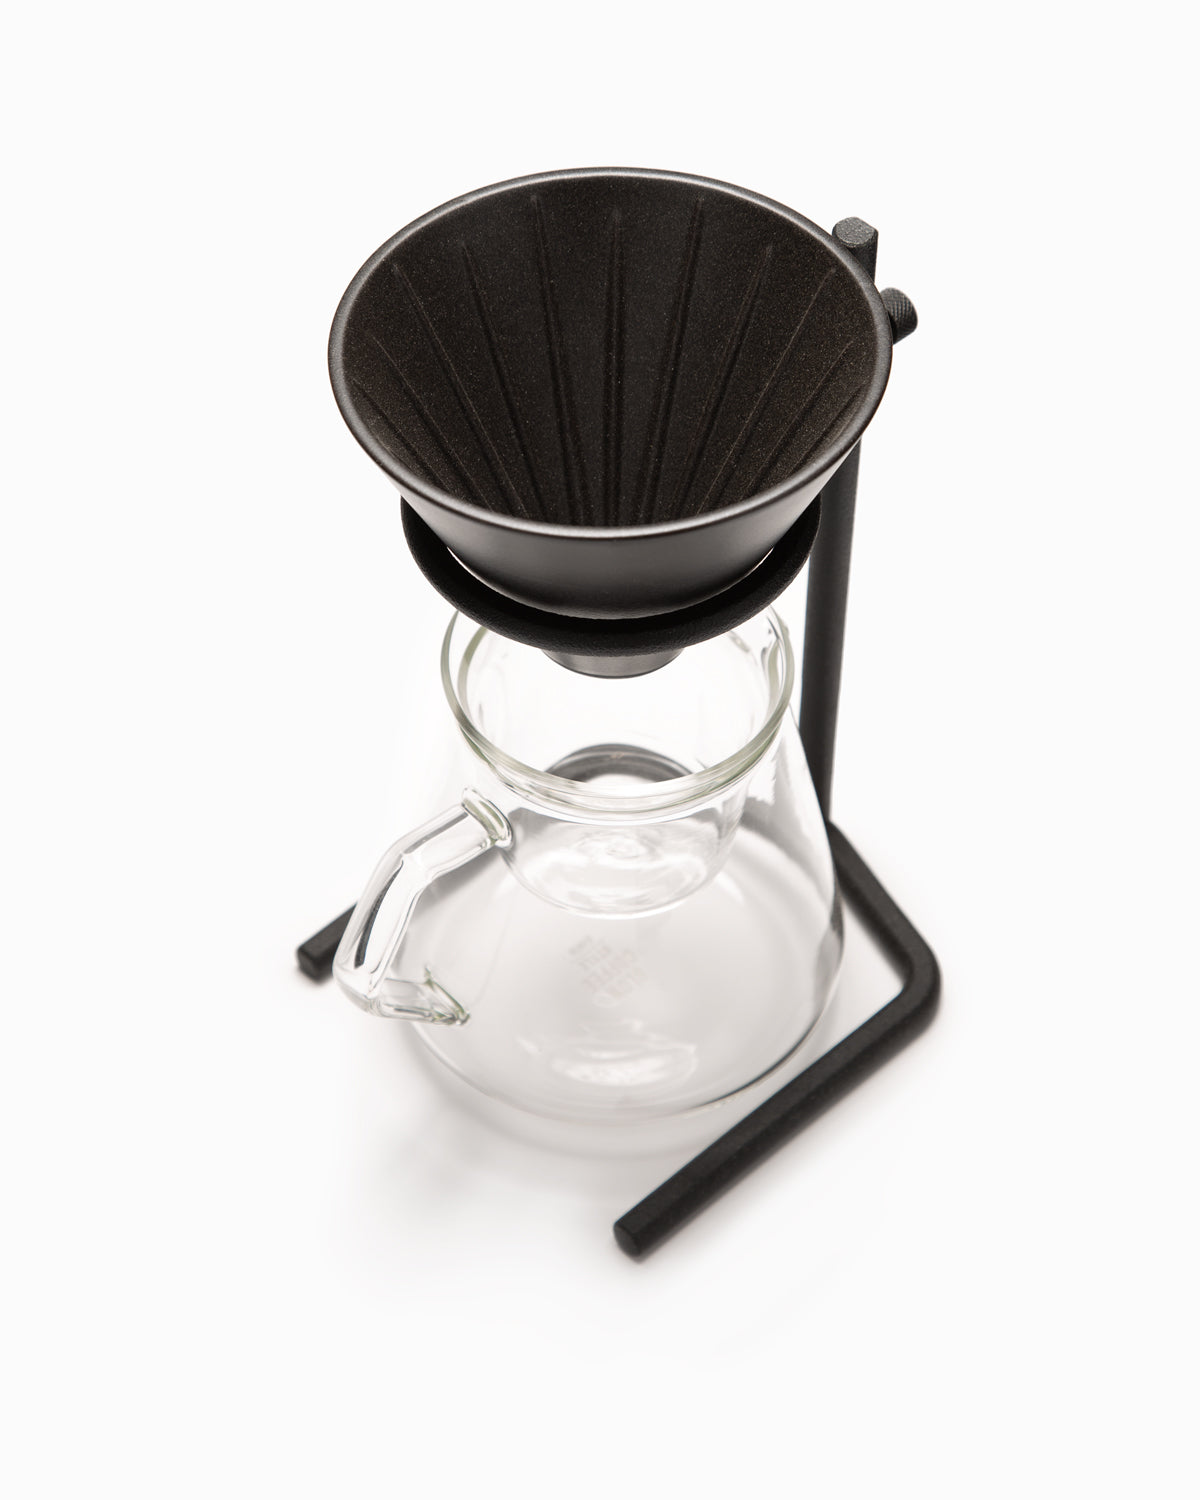 4 Cup Brewer Stand Set